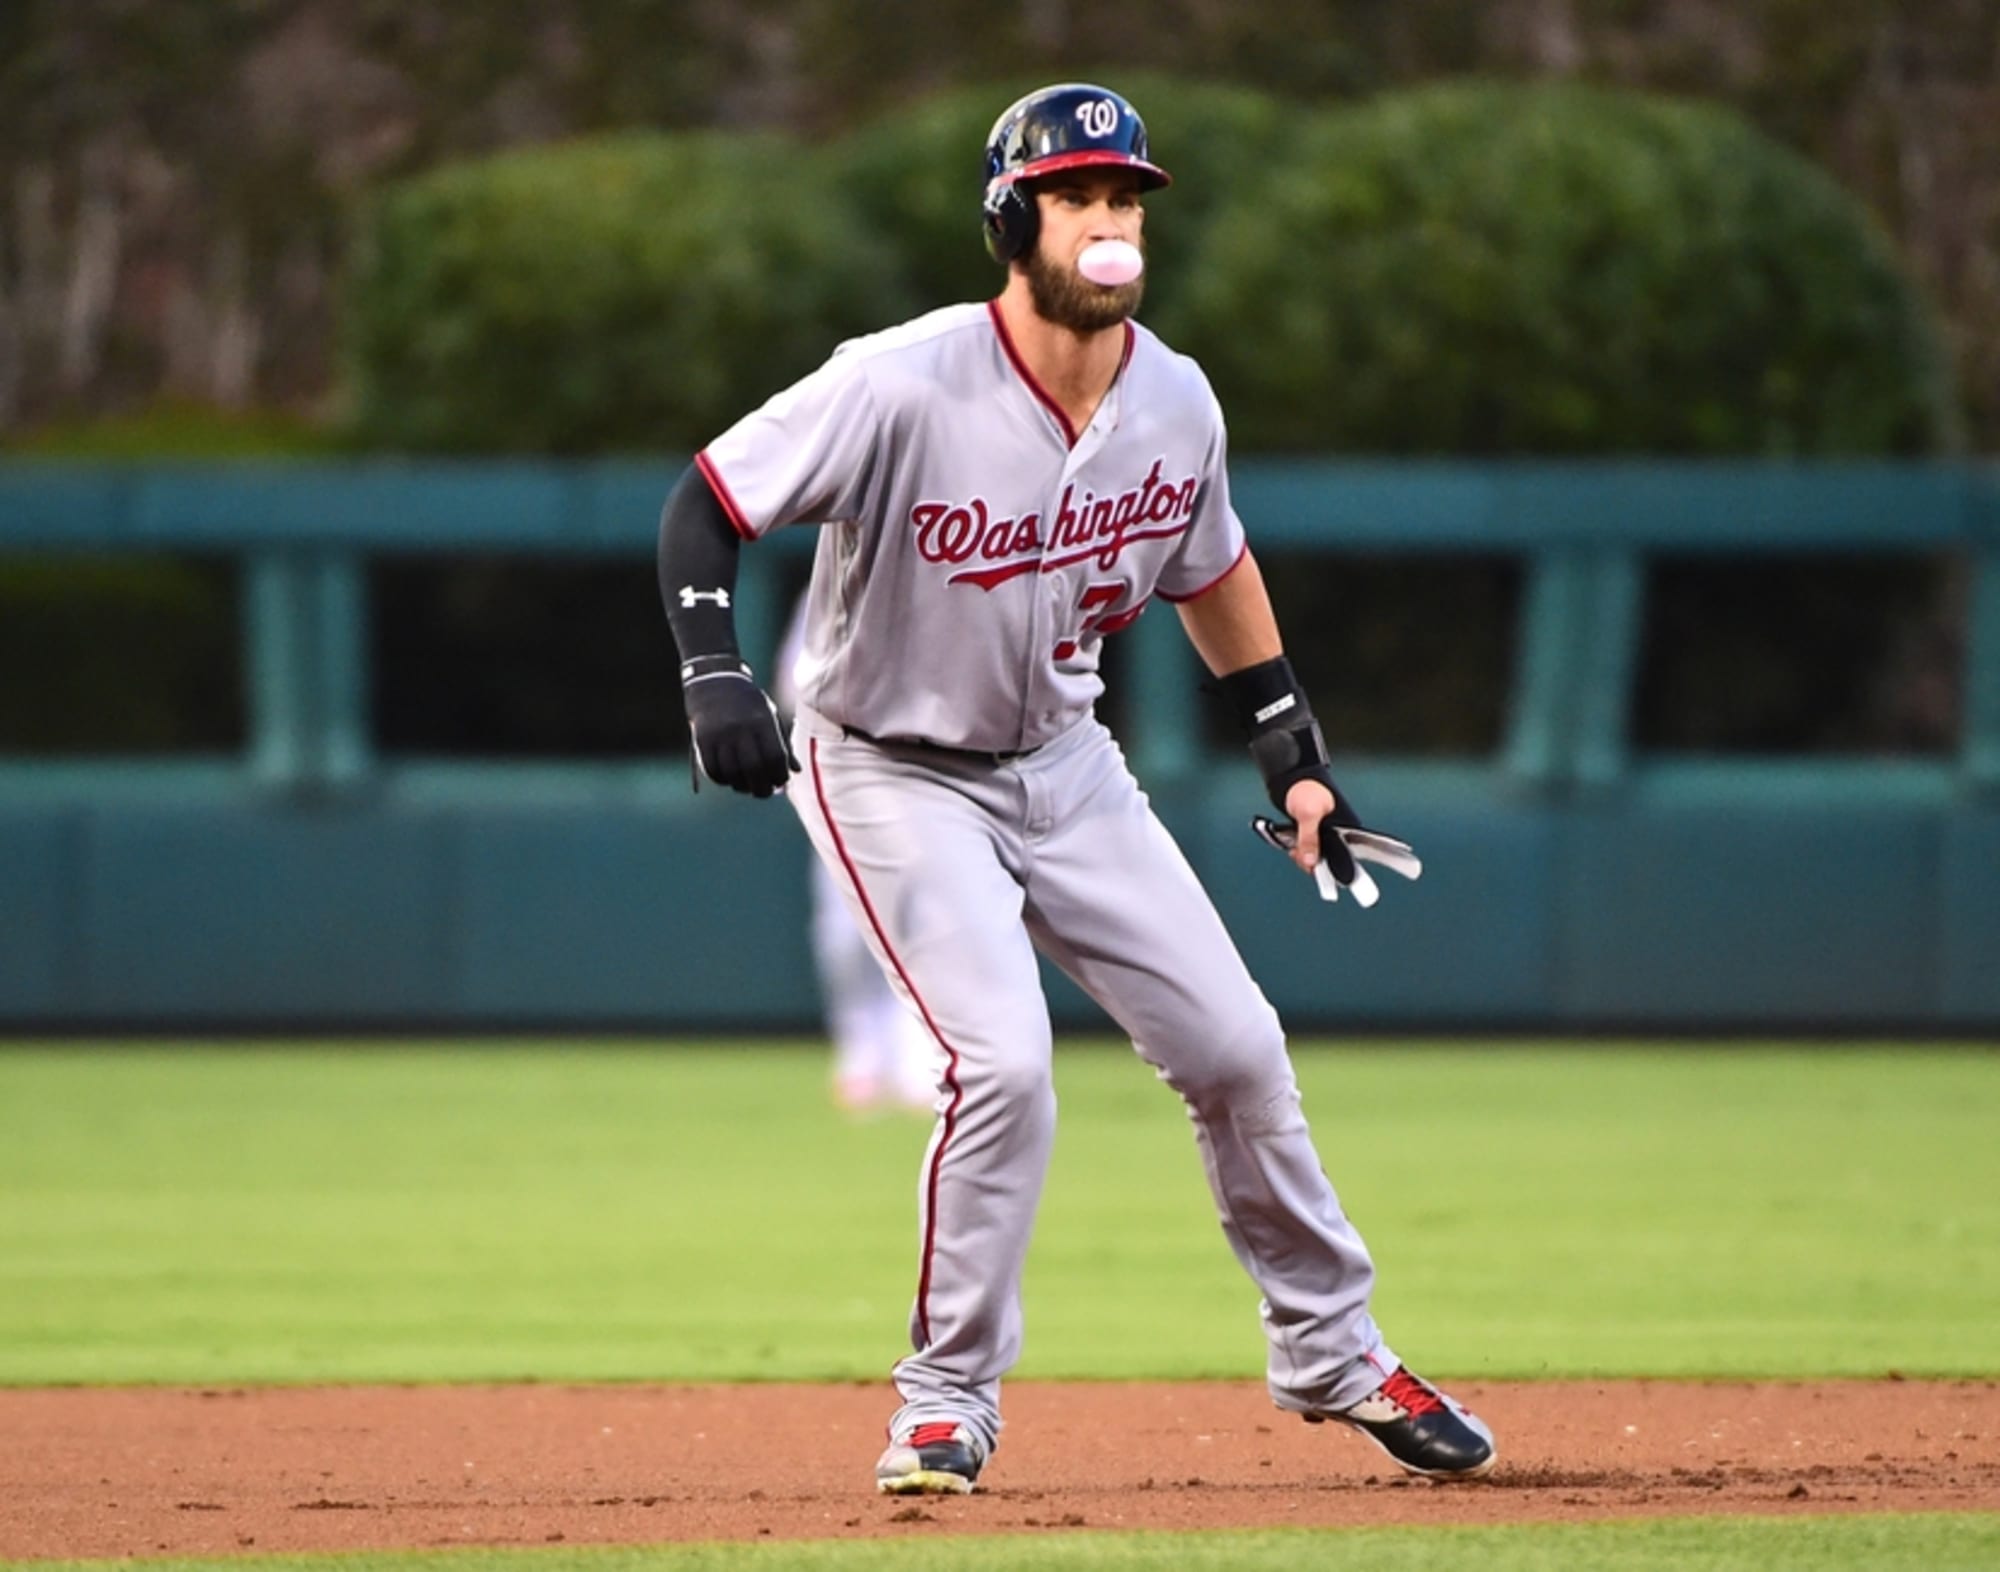 Is Bryce Harper's act wearing thin with Nationals?